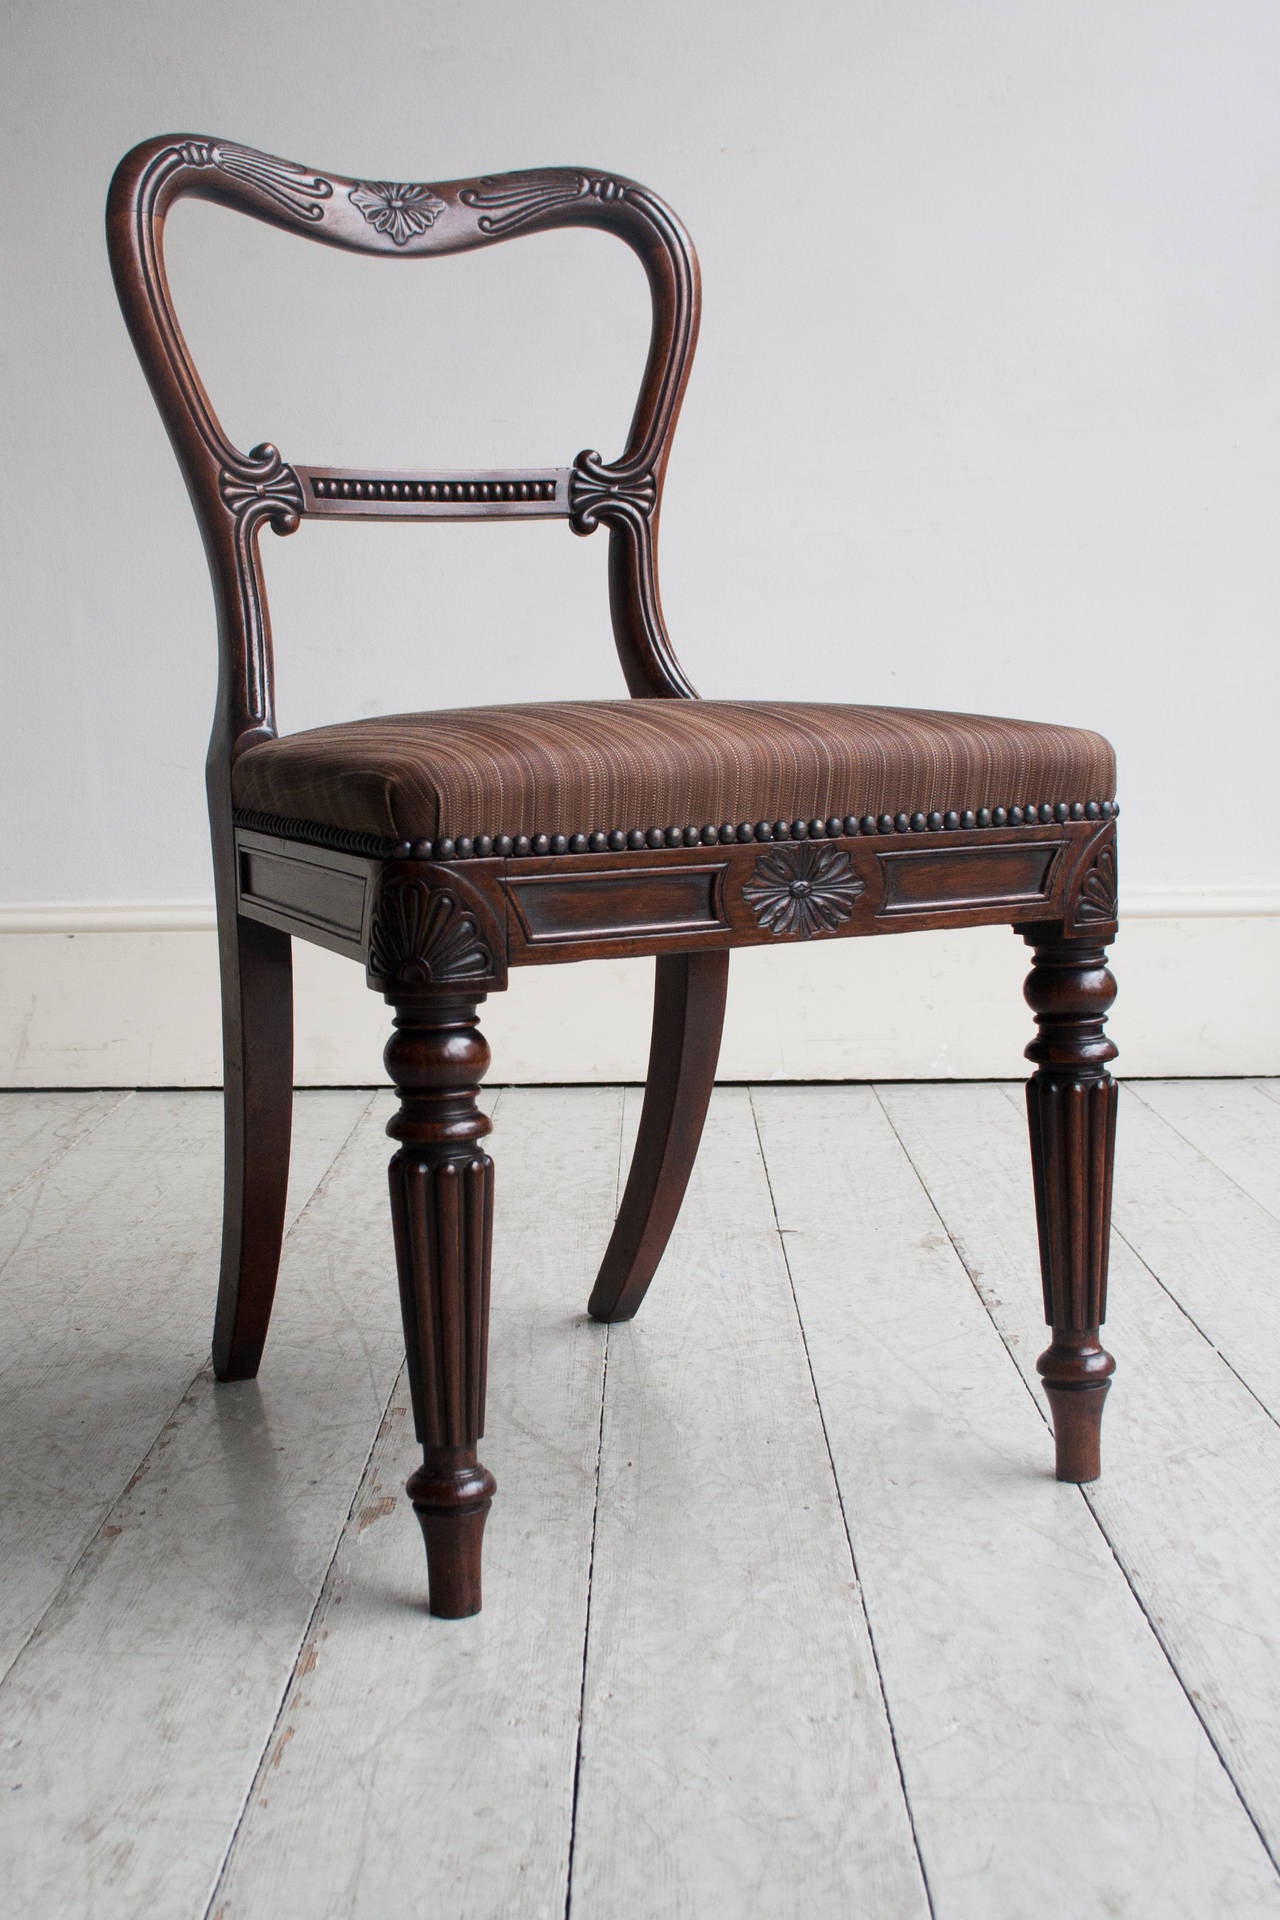 in the best quality rosewood and of exceptional quality, colour and original condition, the seat rails stamped 'E L' with the remains of paper label 'R & Newton Upholstery,' having been re-upholstered in brown woven horse-hair fabric. By Gillow of